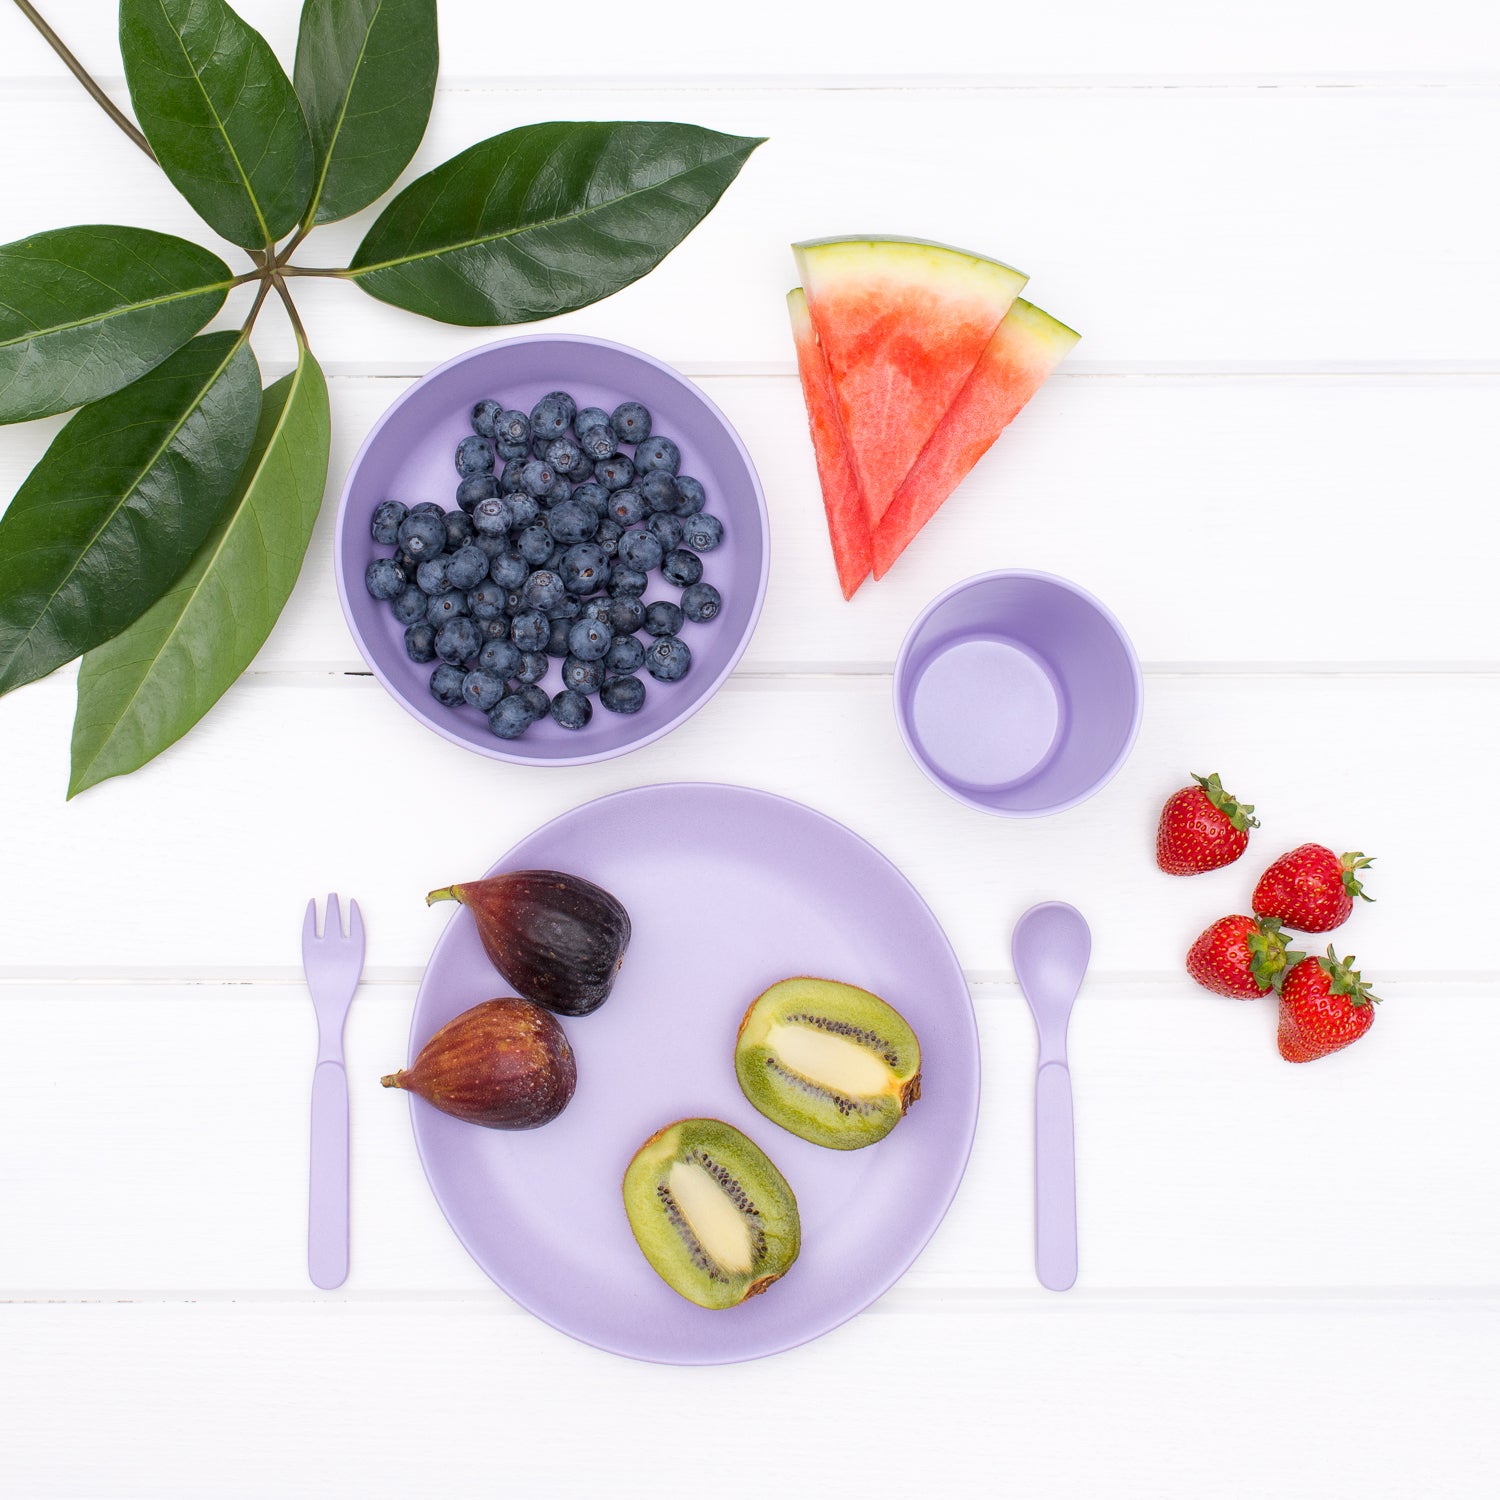 bobo & boo lilac bamboo dinnerwear giftset styled with a range of fruits